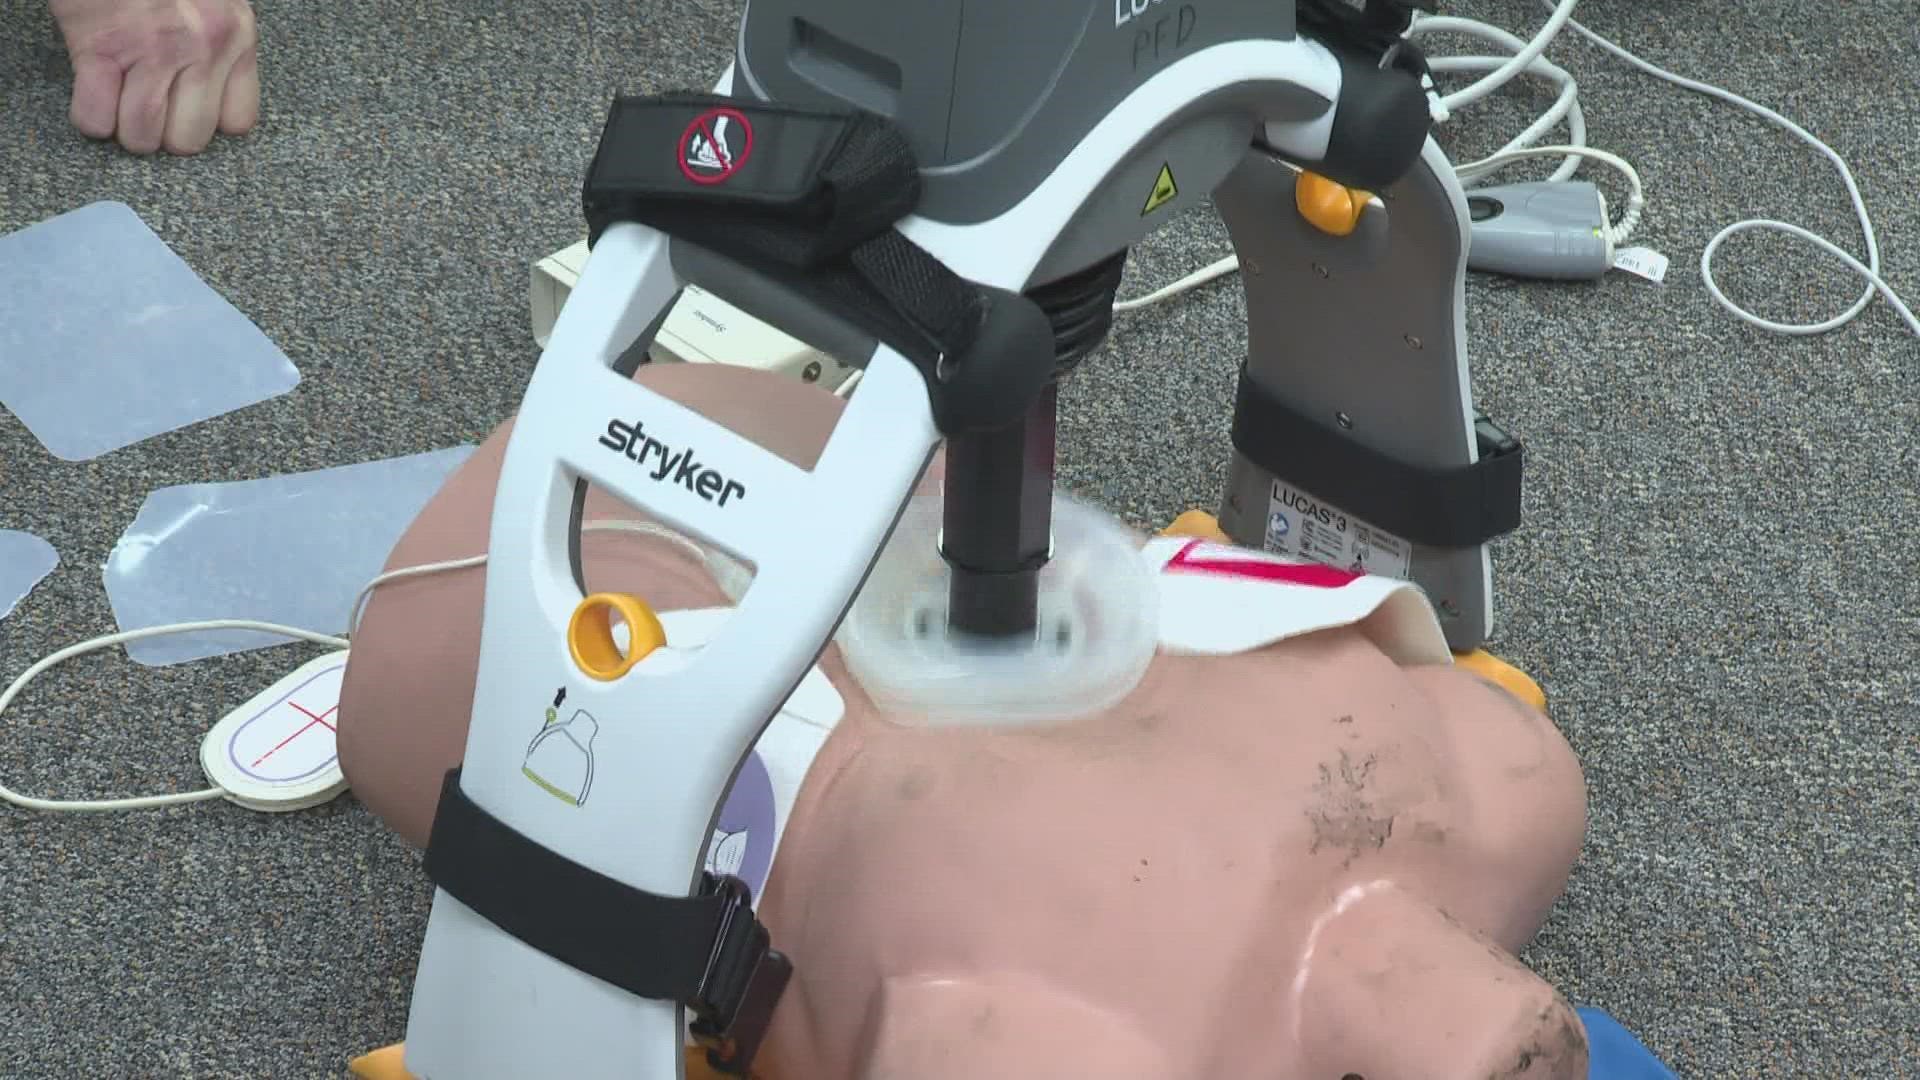 This month, the Portland Fire Department acquired three mechanical CPR devices after receiving a $50,000 FEMA grant.